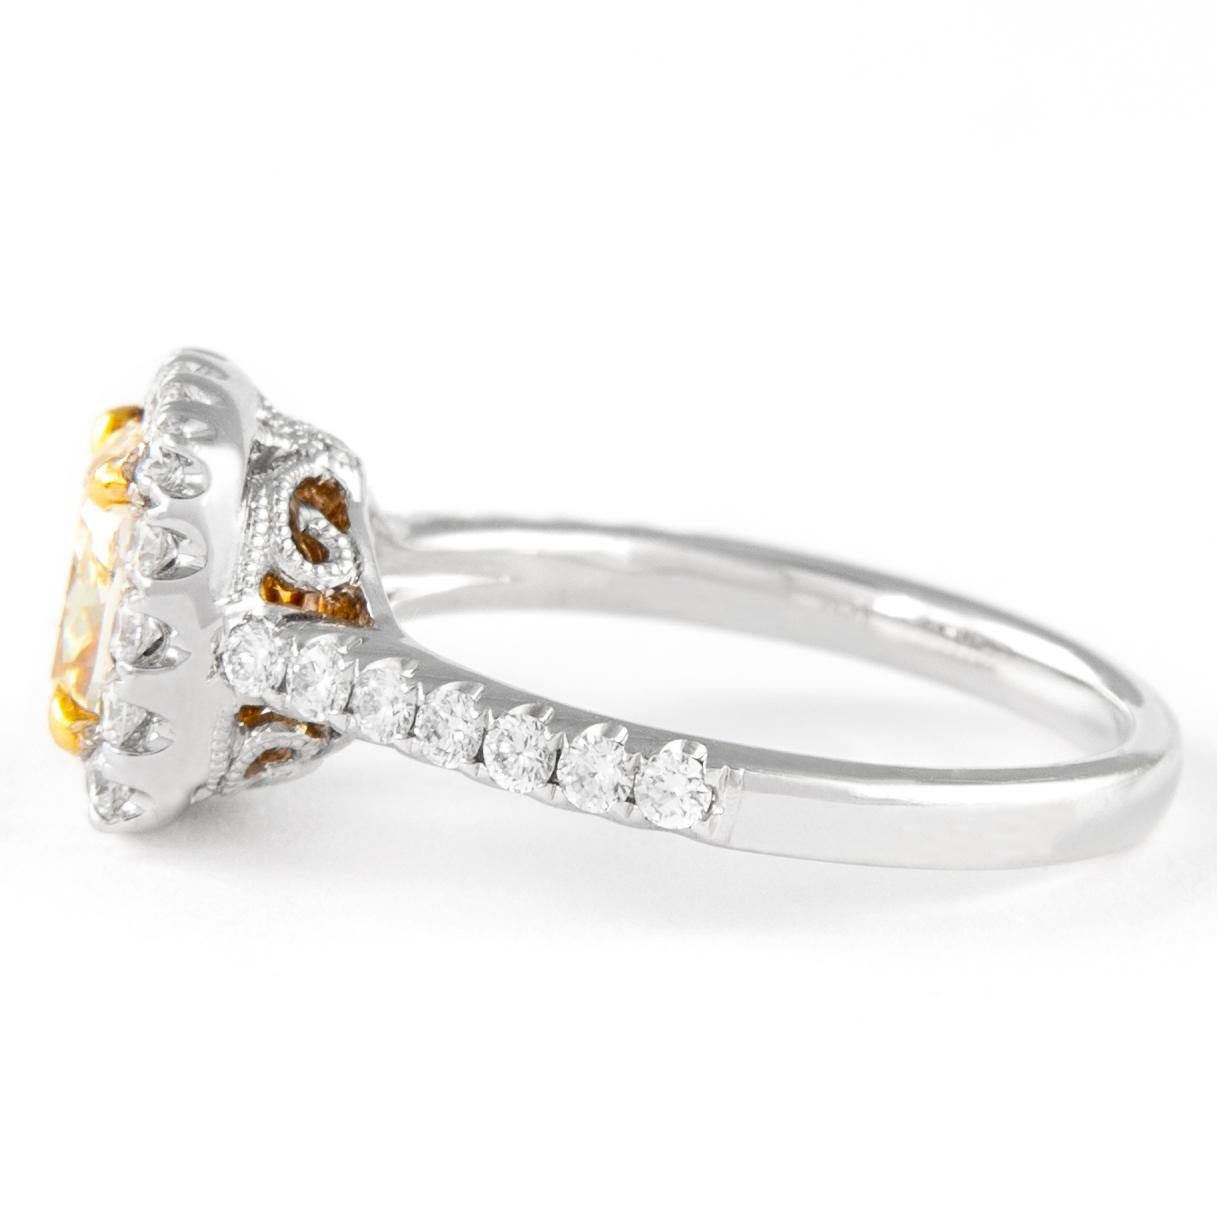 Cushion Cut Alexander 2.31ctt Fancy Yellow VS1 Cushion Diamond with Halo Ring 18k Two Tone For Sale